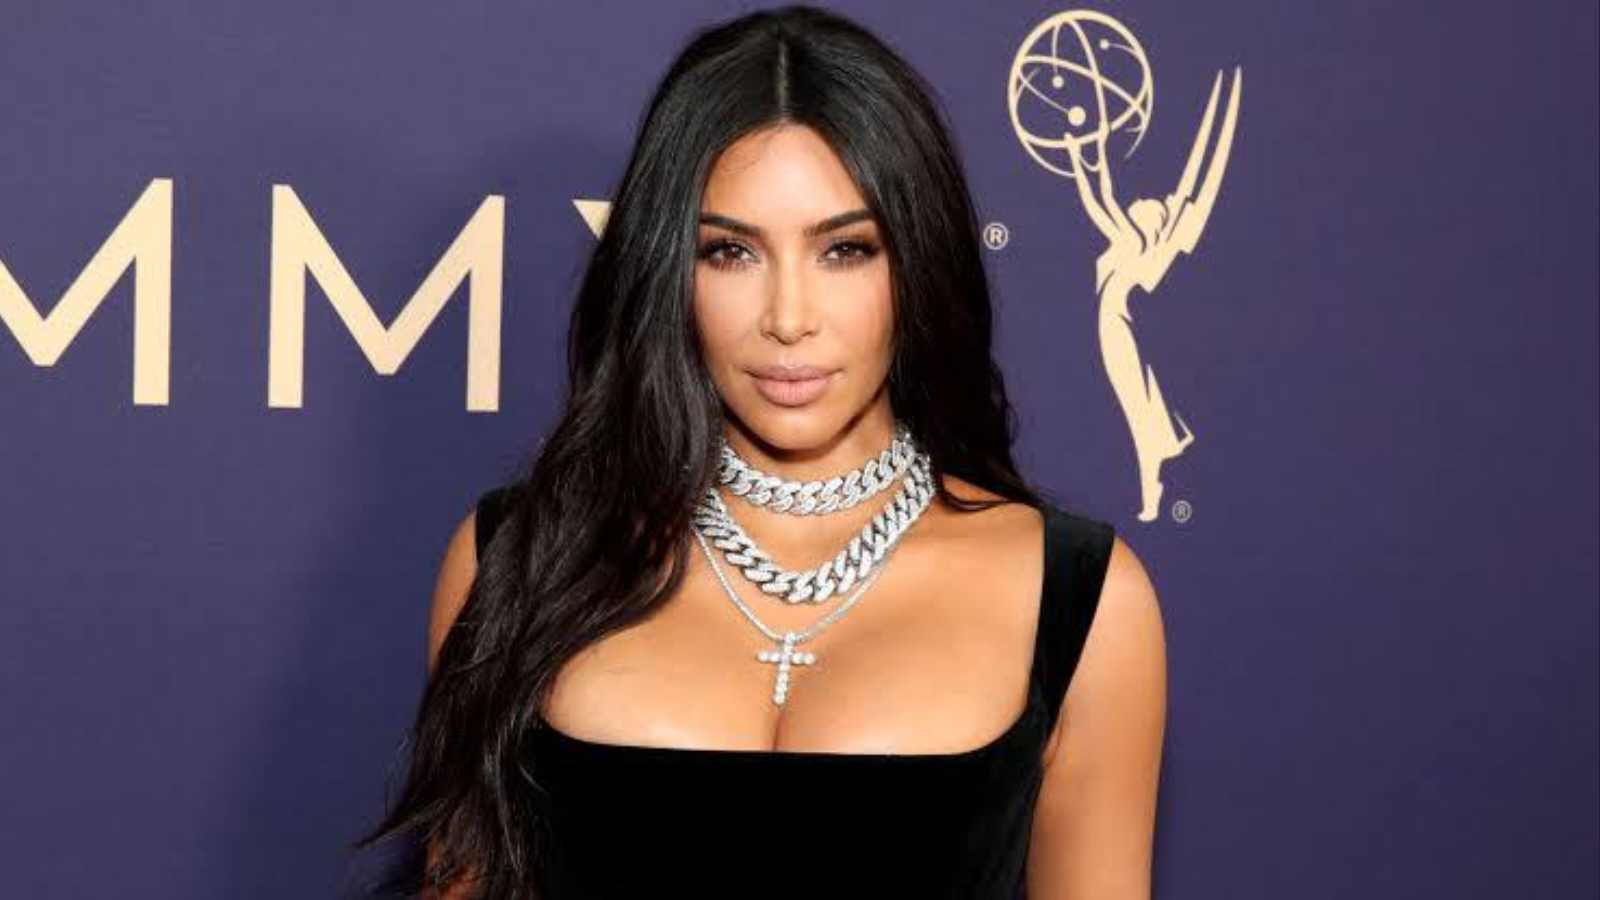 Kim Kardashian's first job was at a clothing store in California